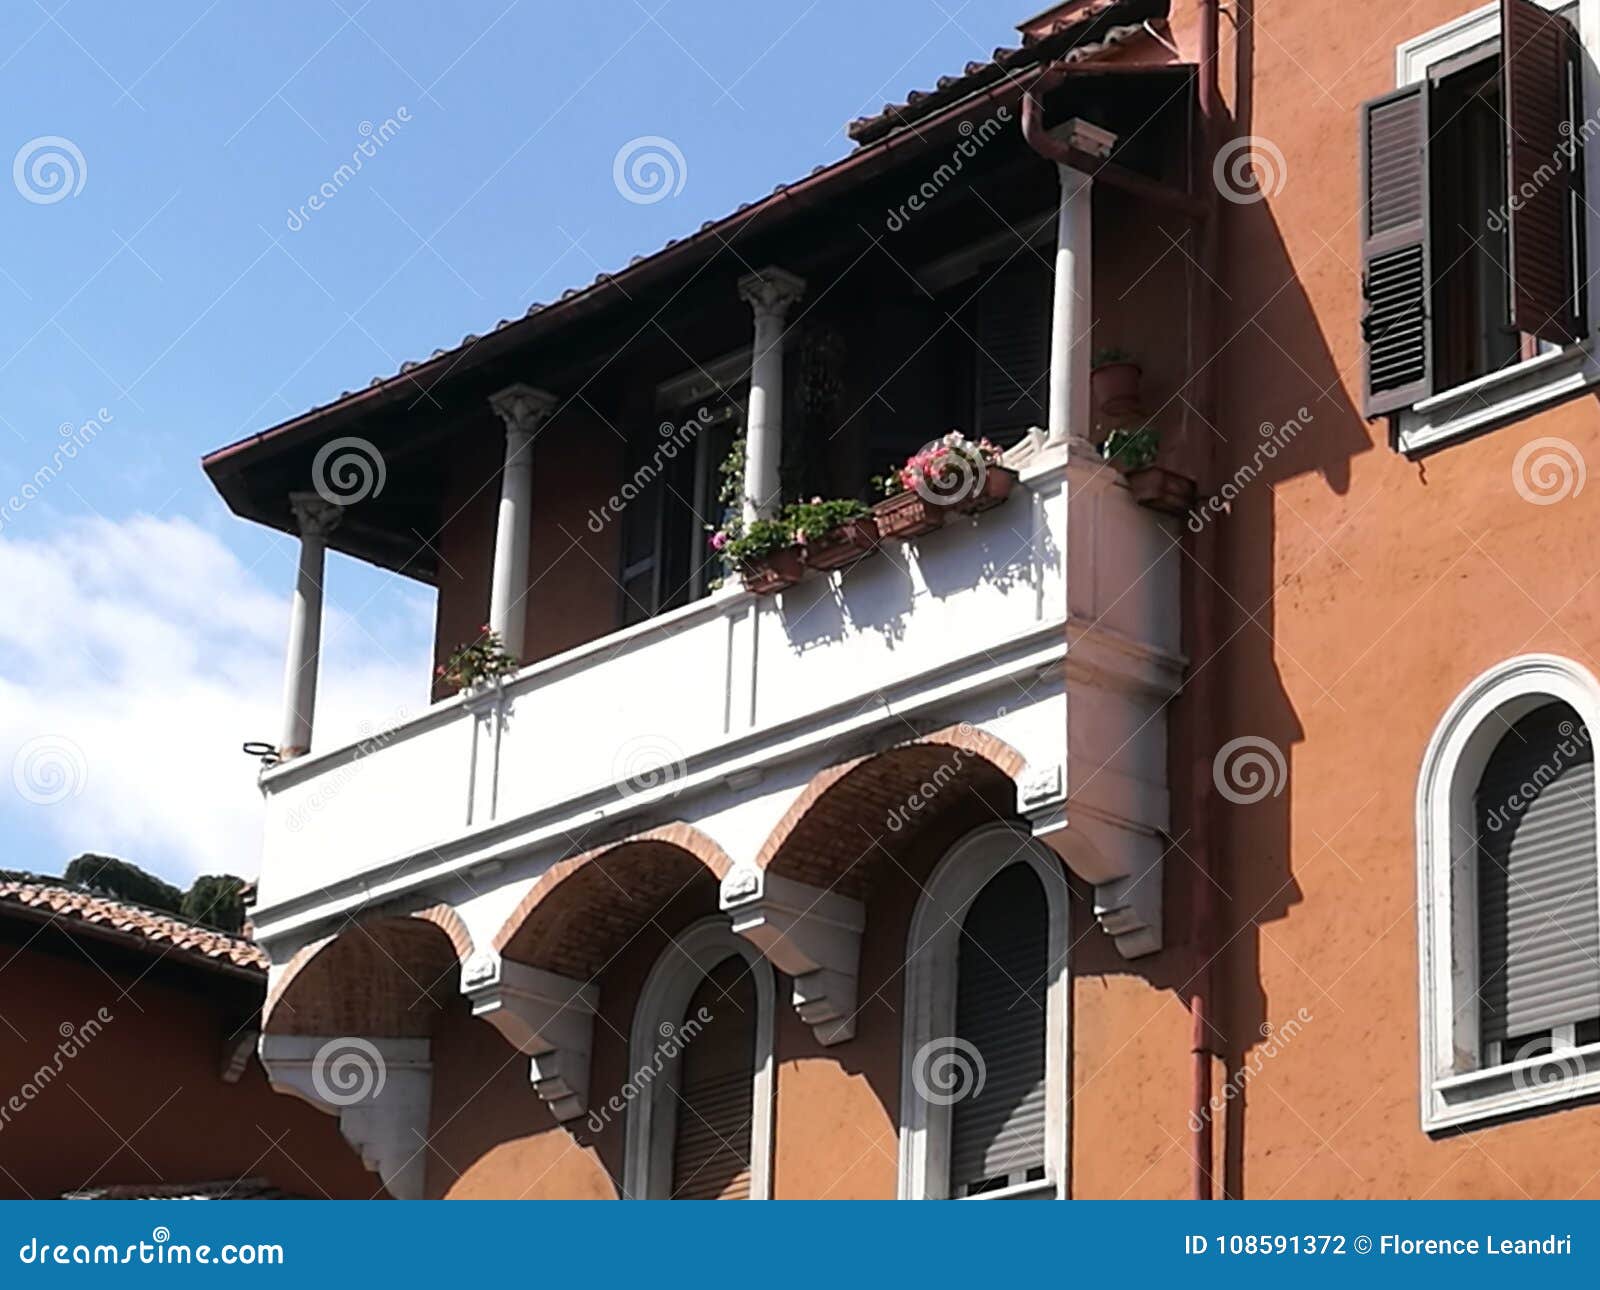 balcony with flowers in the garbatella district to rome in italy.